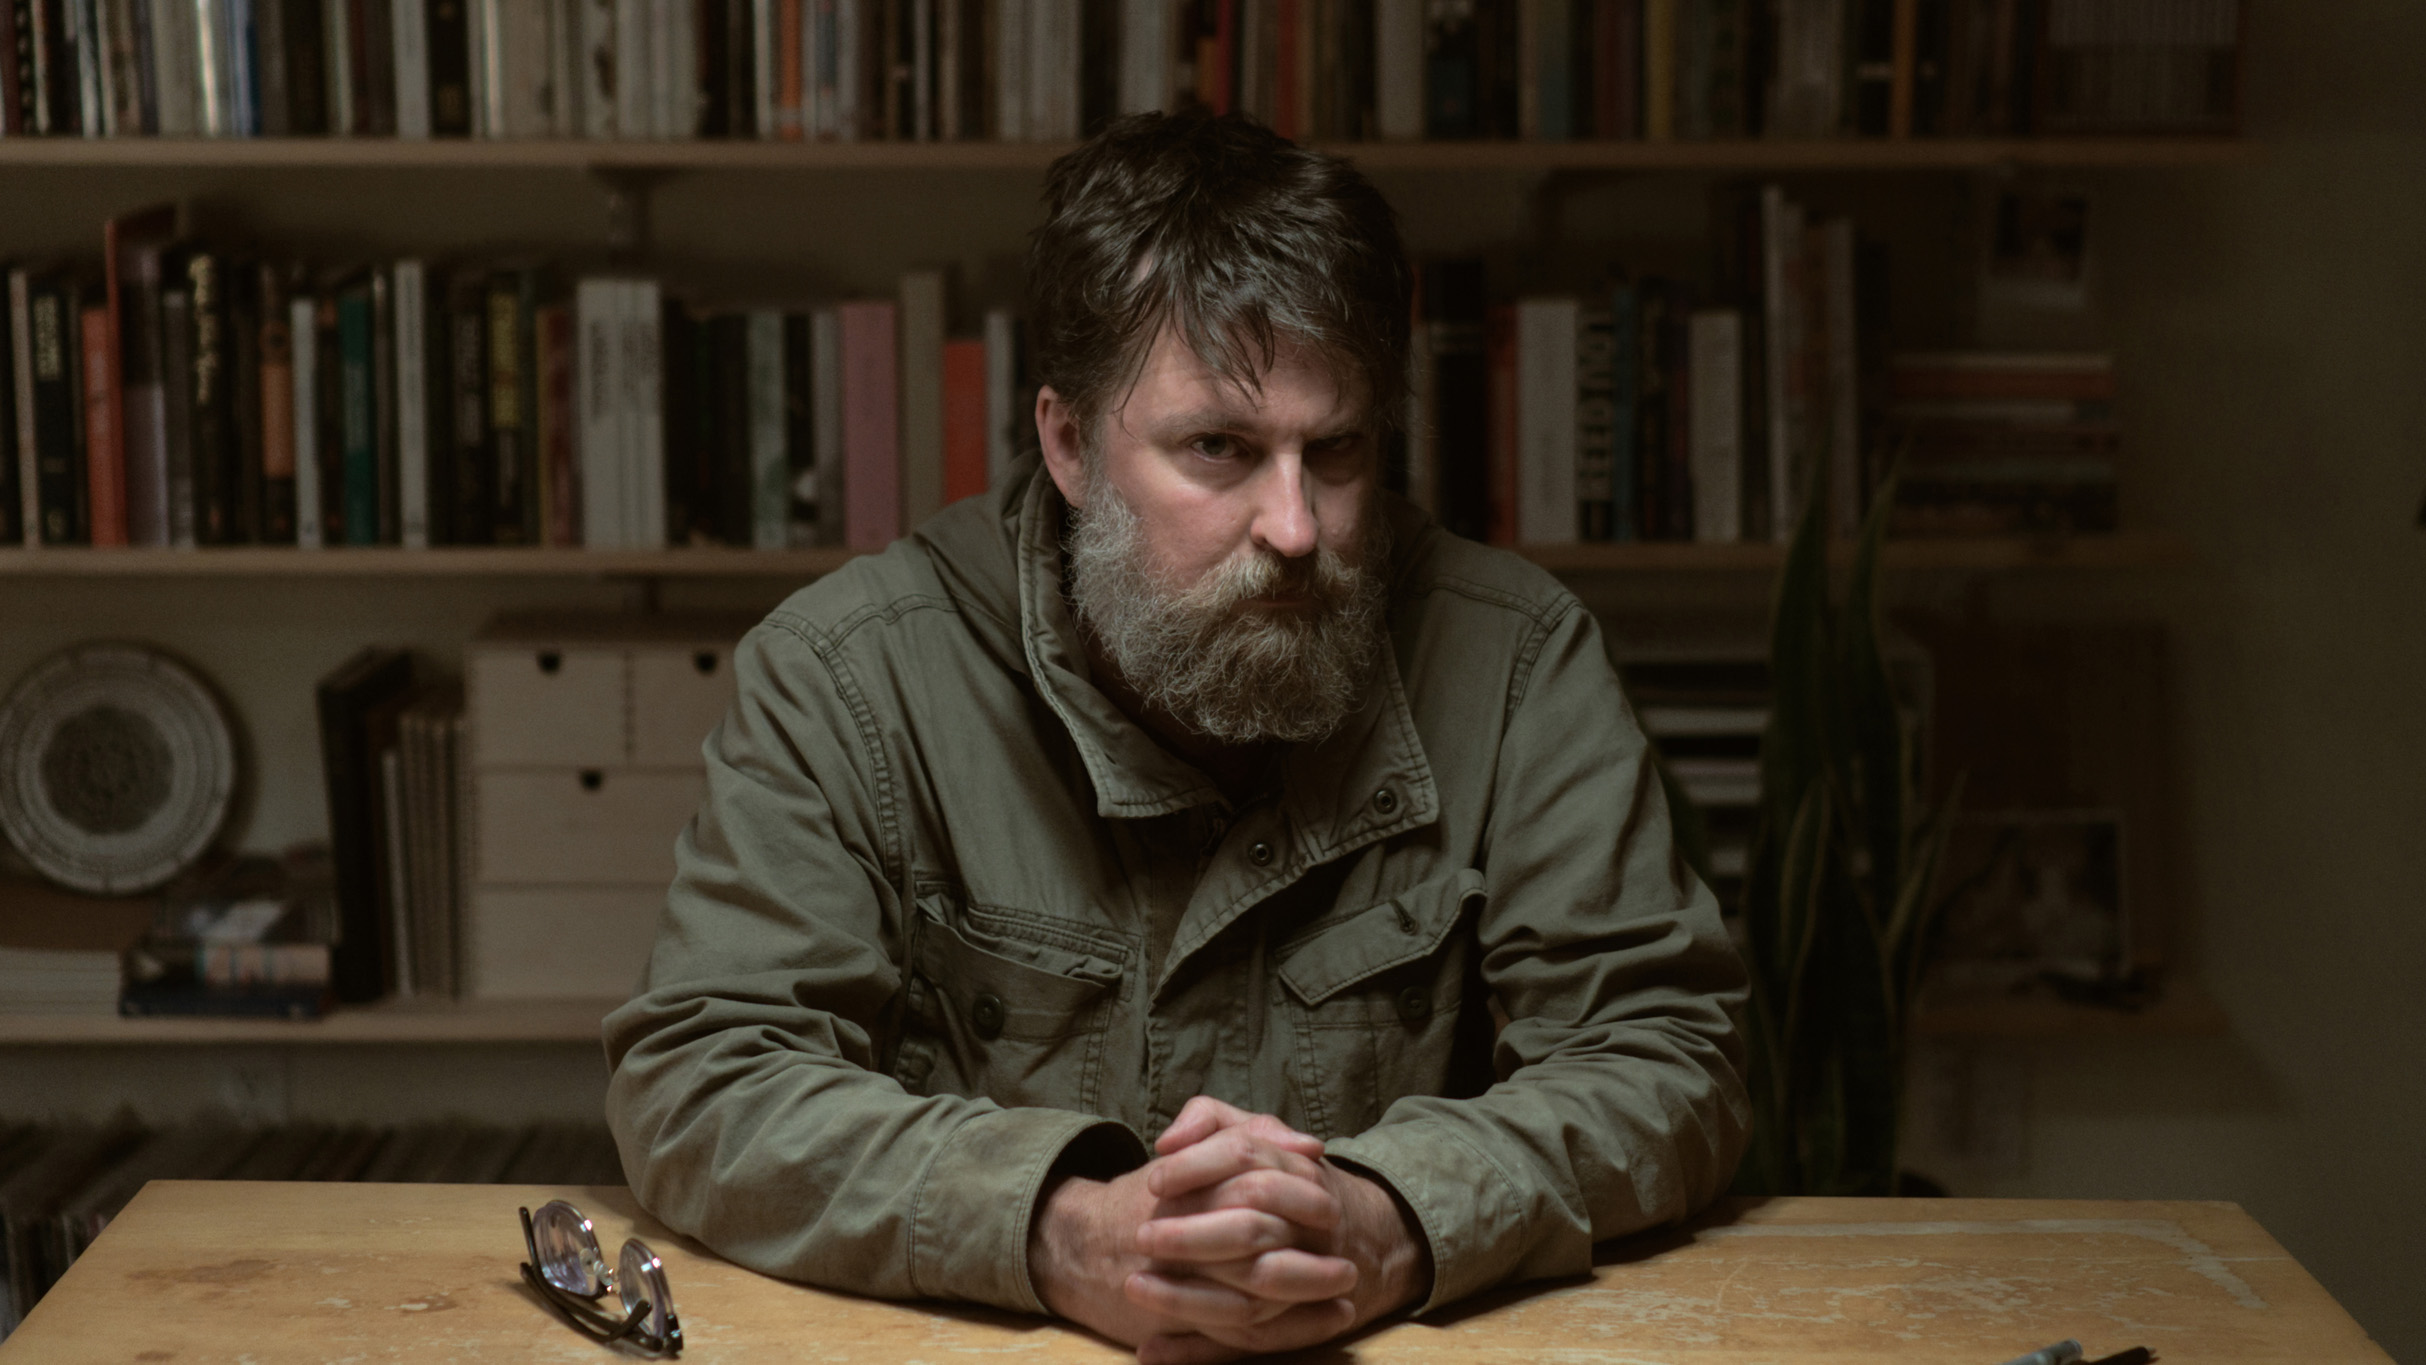 Six Organs of Admittance (moved to The Golden Bull)